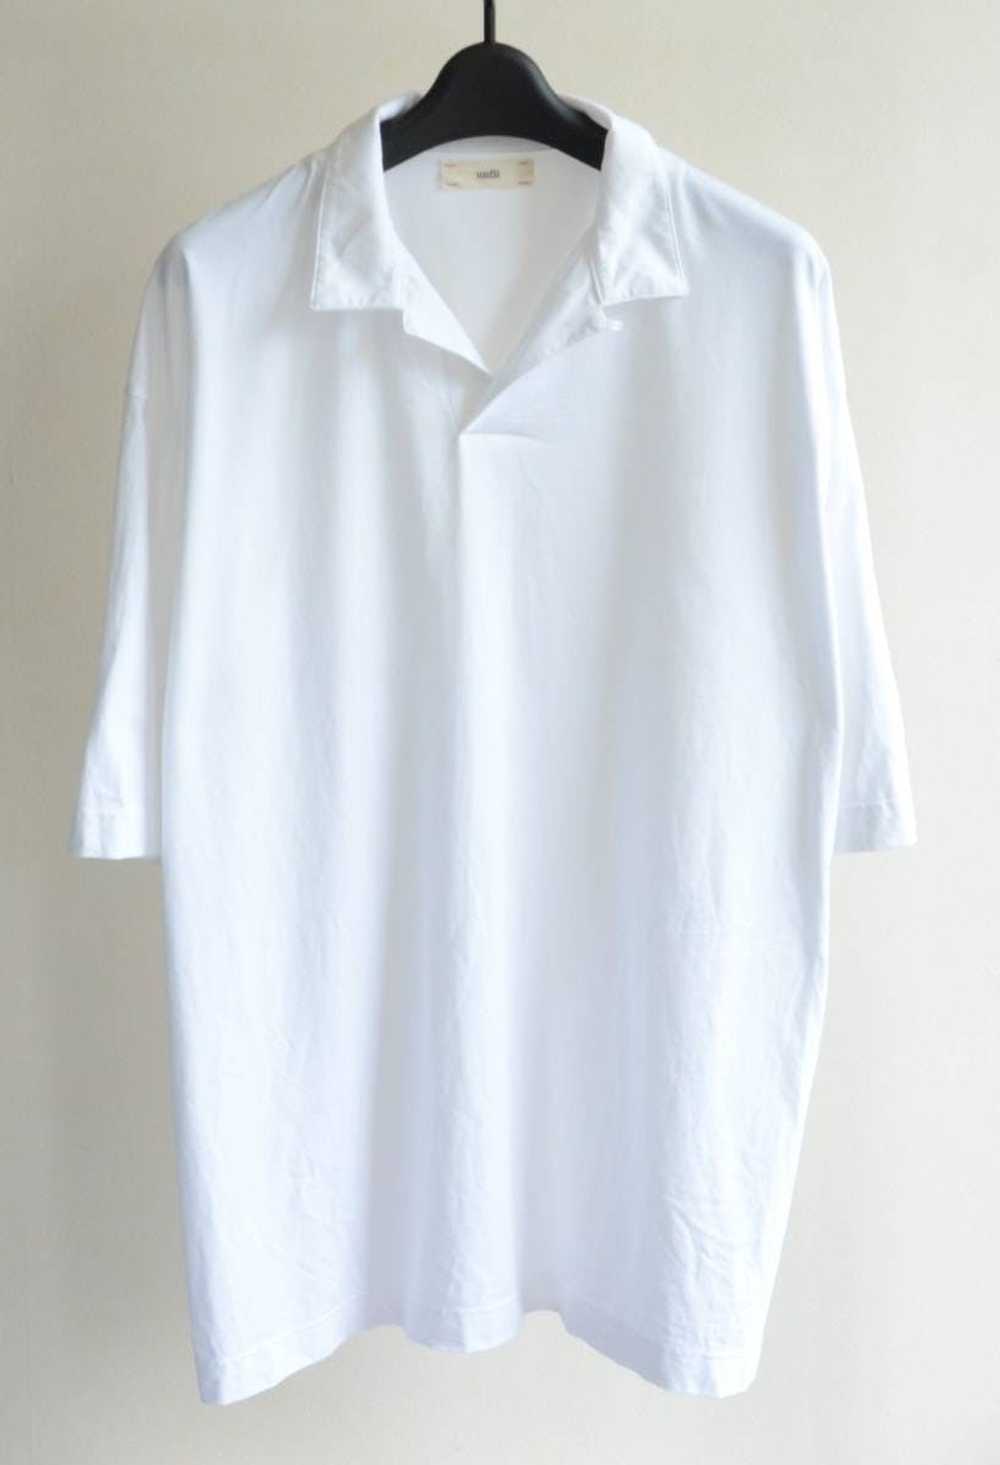 unfil cut-and-sew polo shirt size 5 XL - image 1